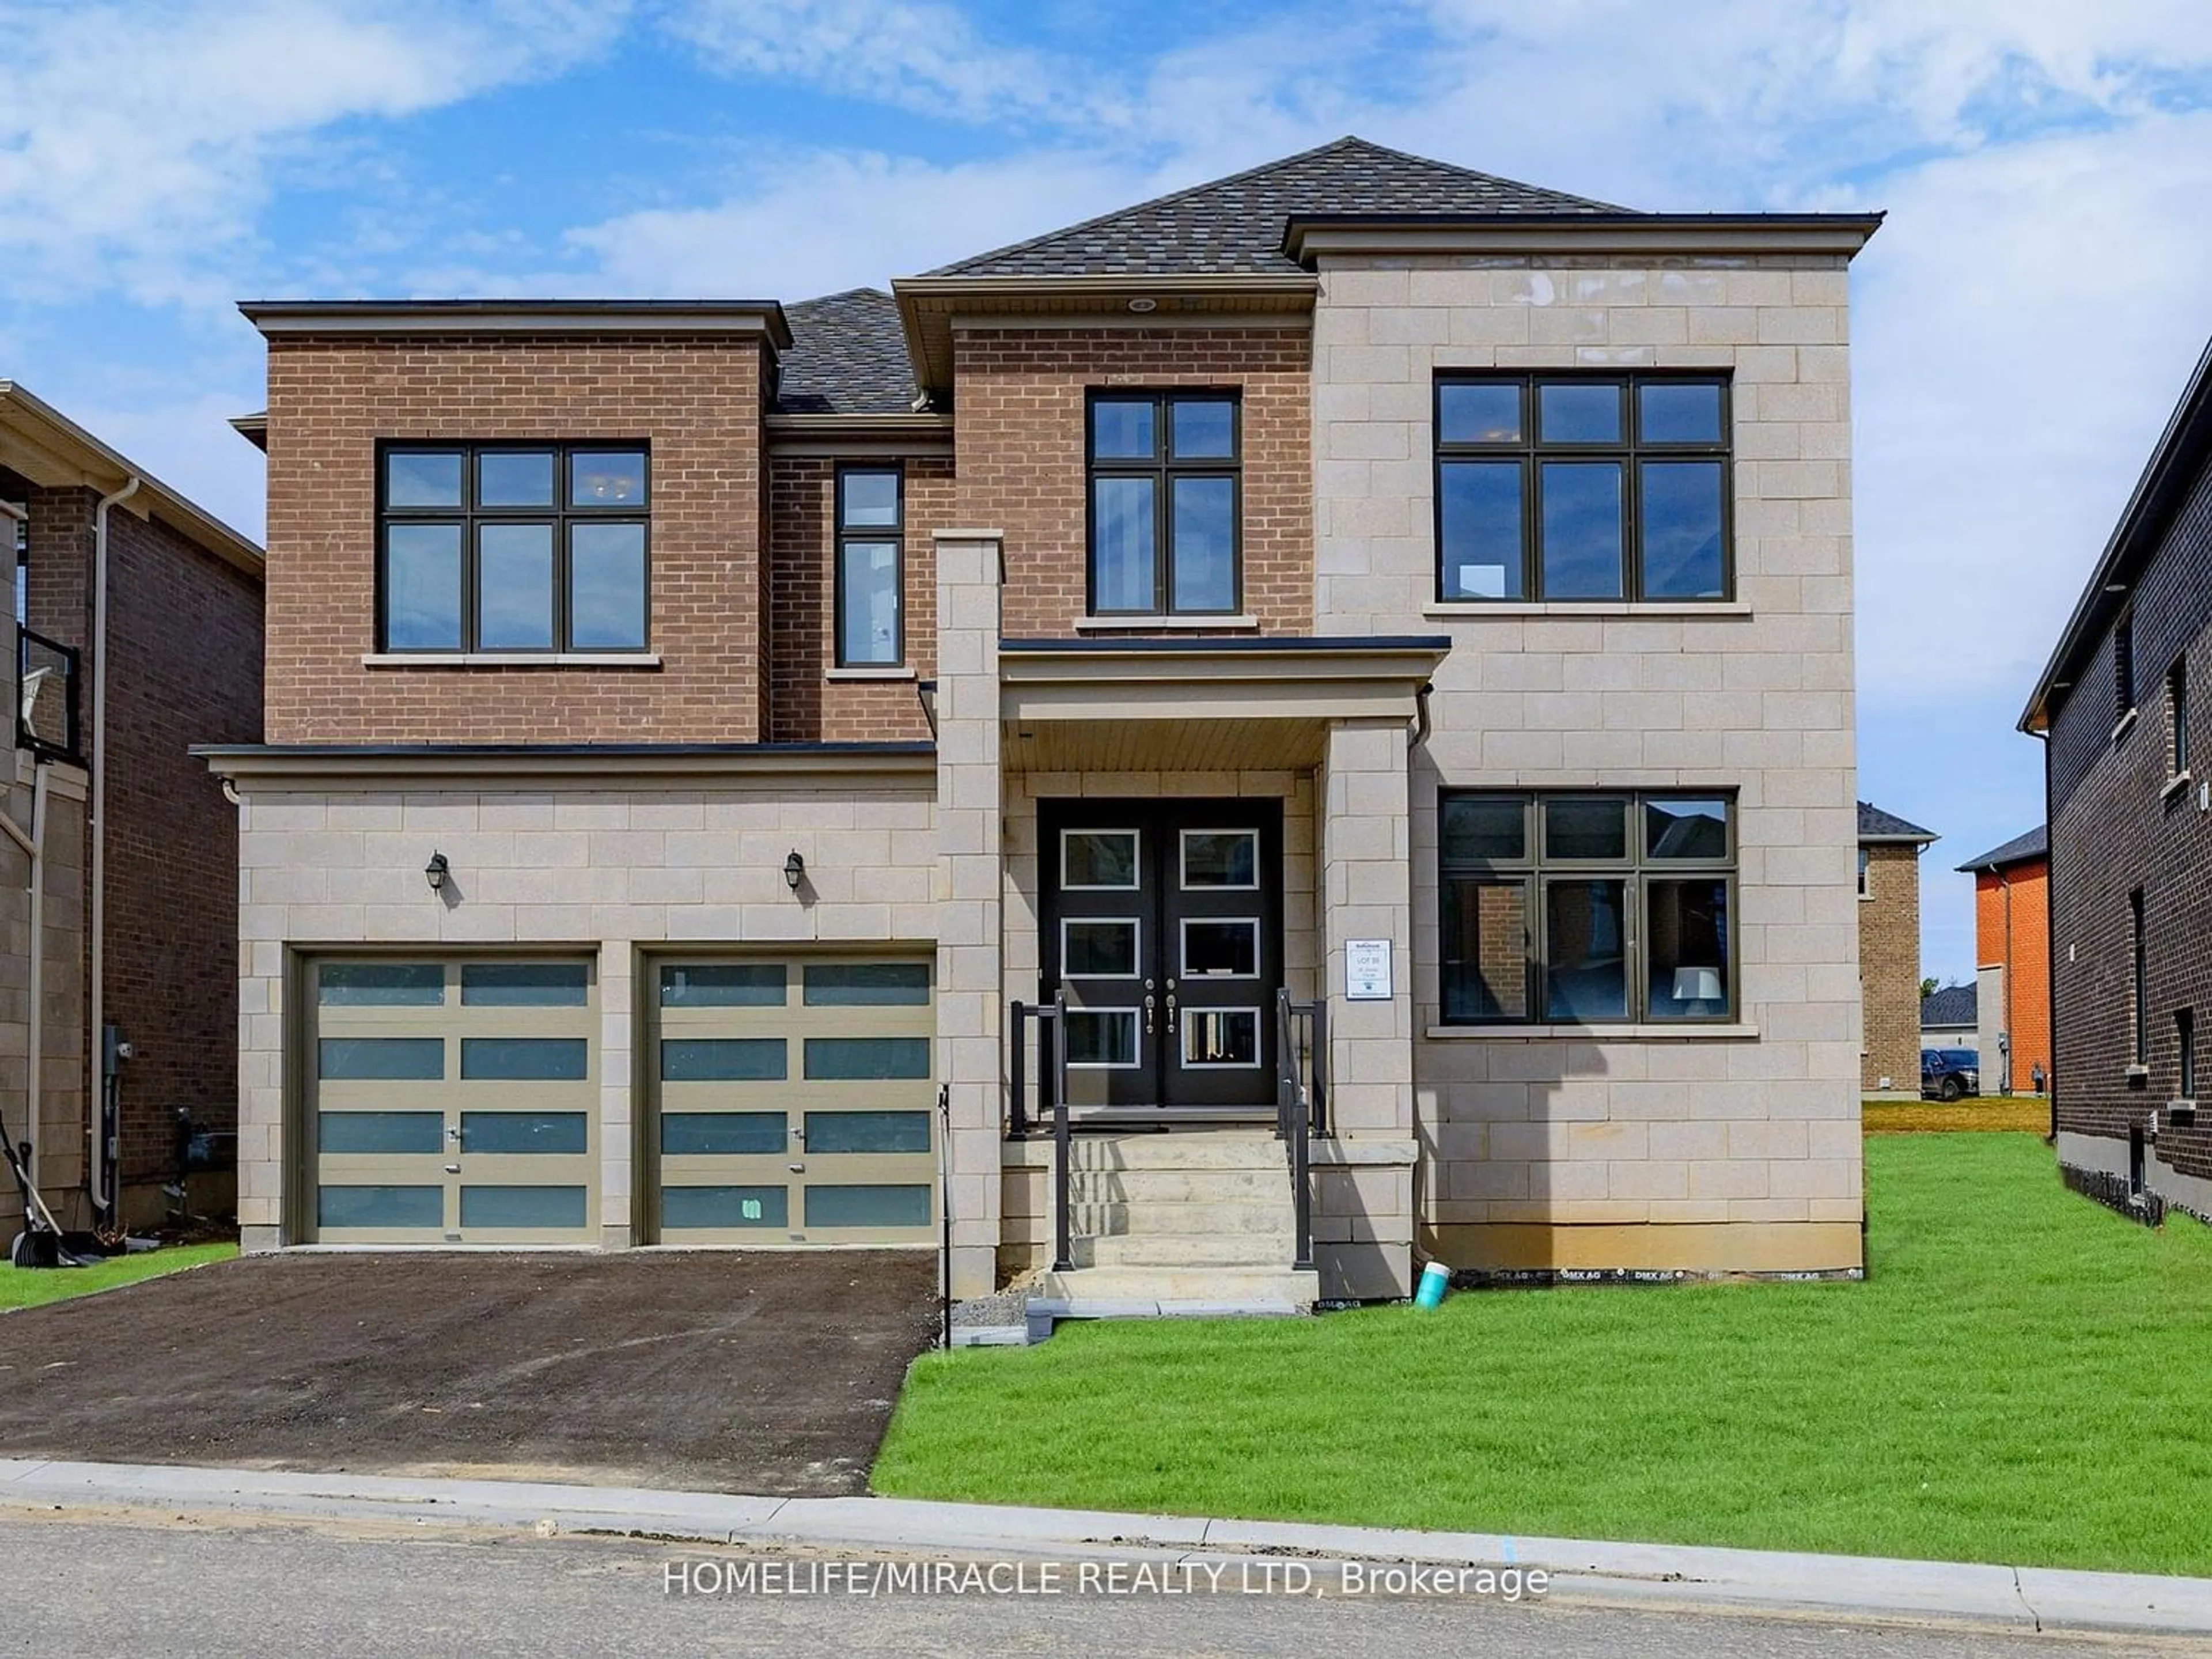 Home with brick exterior material for 25 Joiner Circ, Whitchurch-Stouffville Ontario L4A 4W9